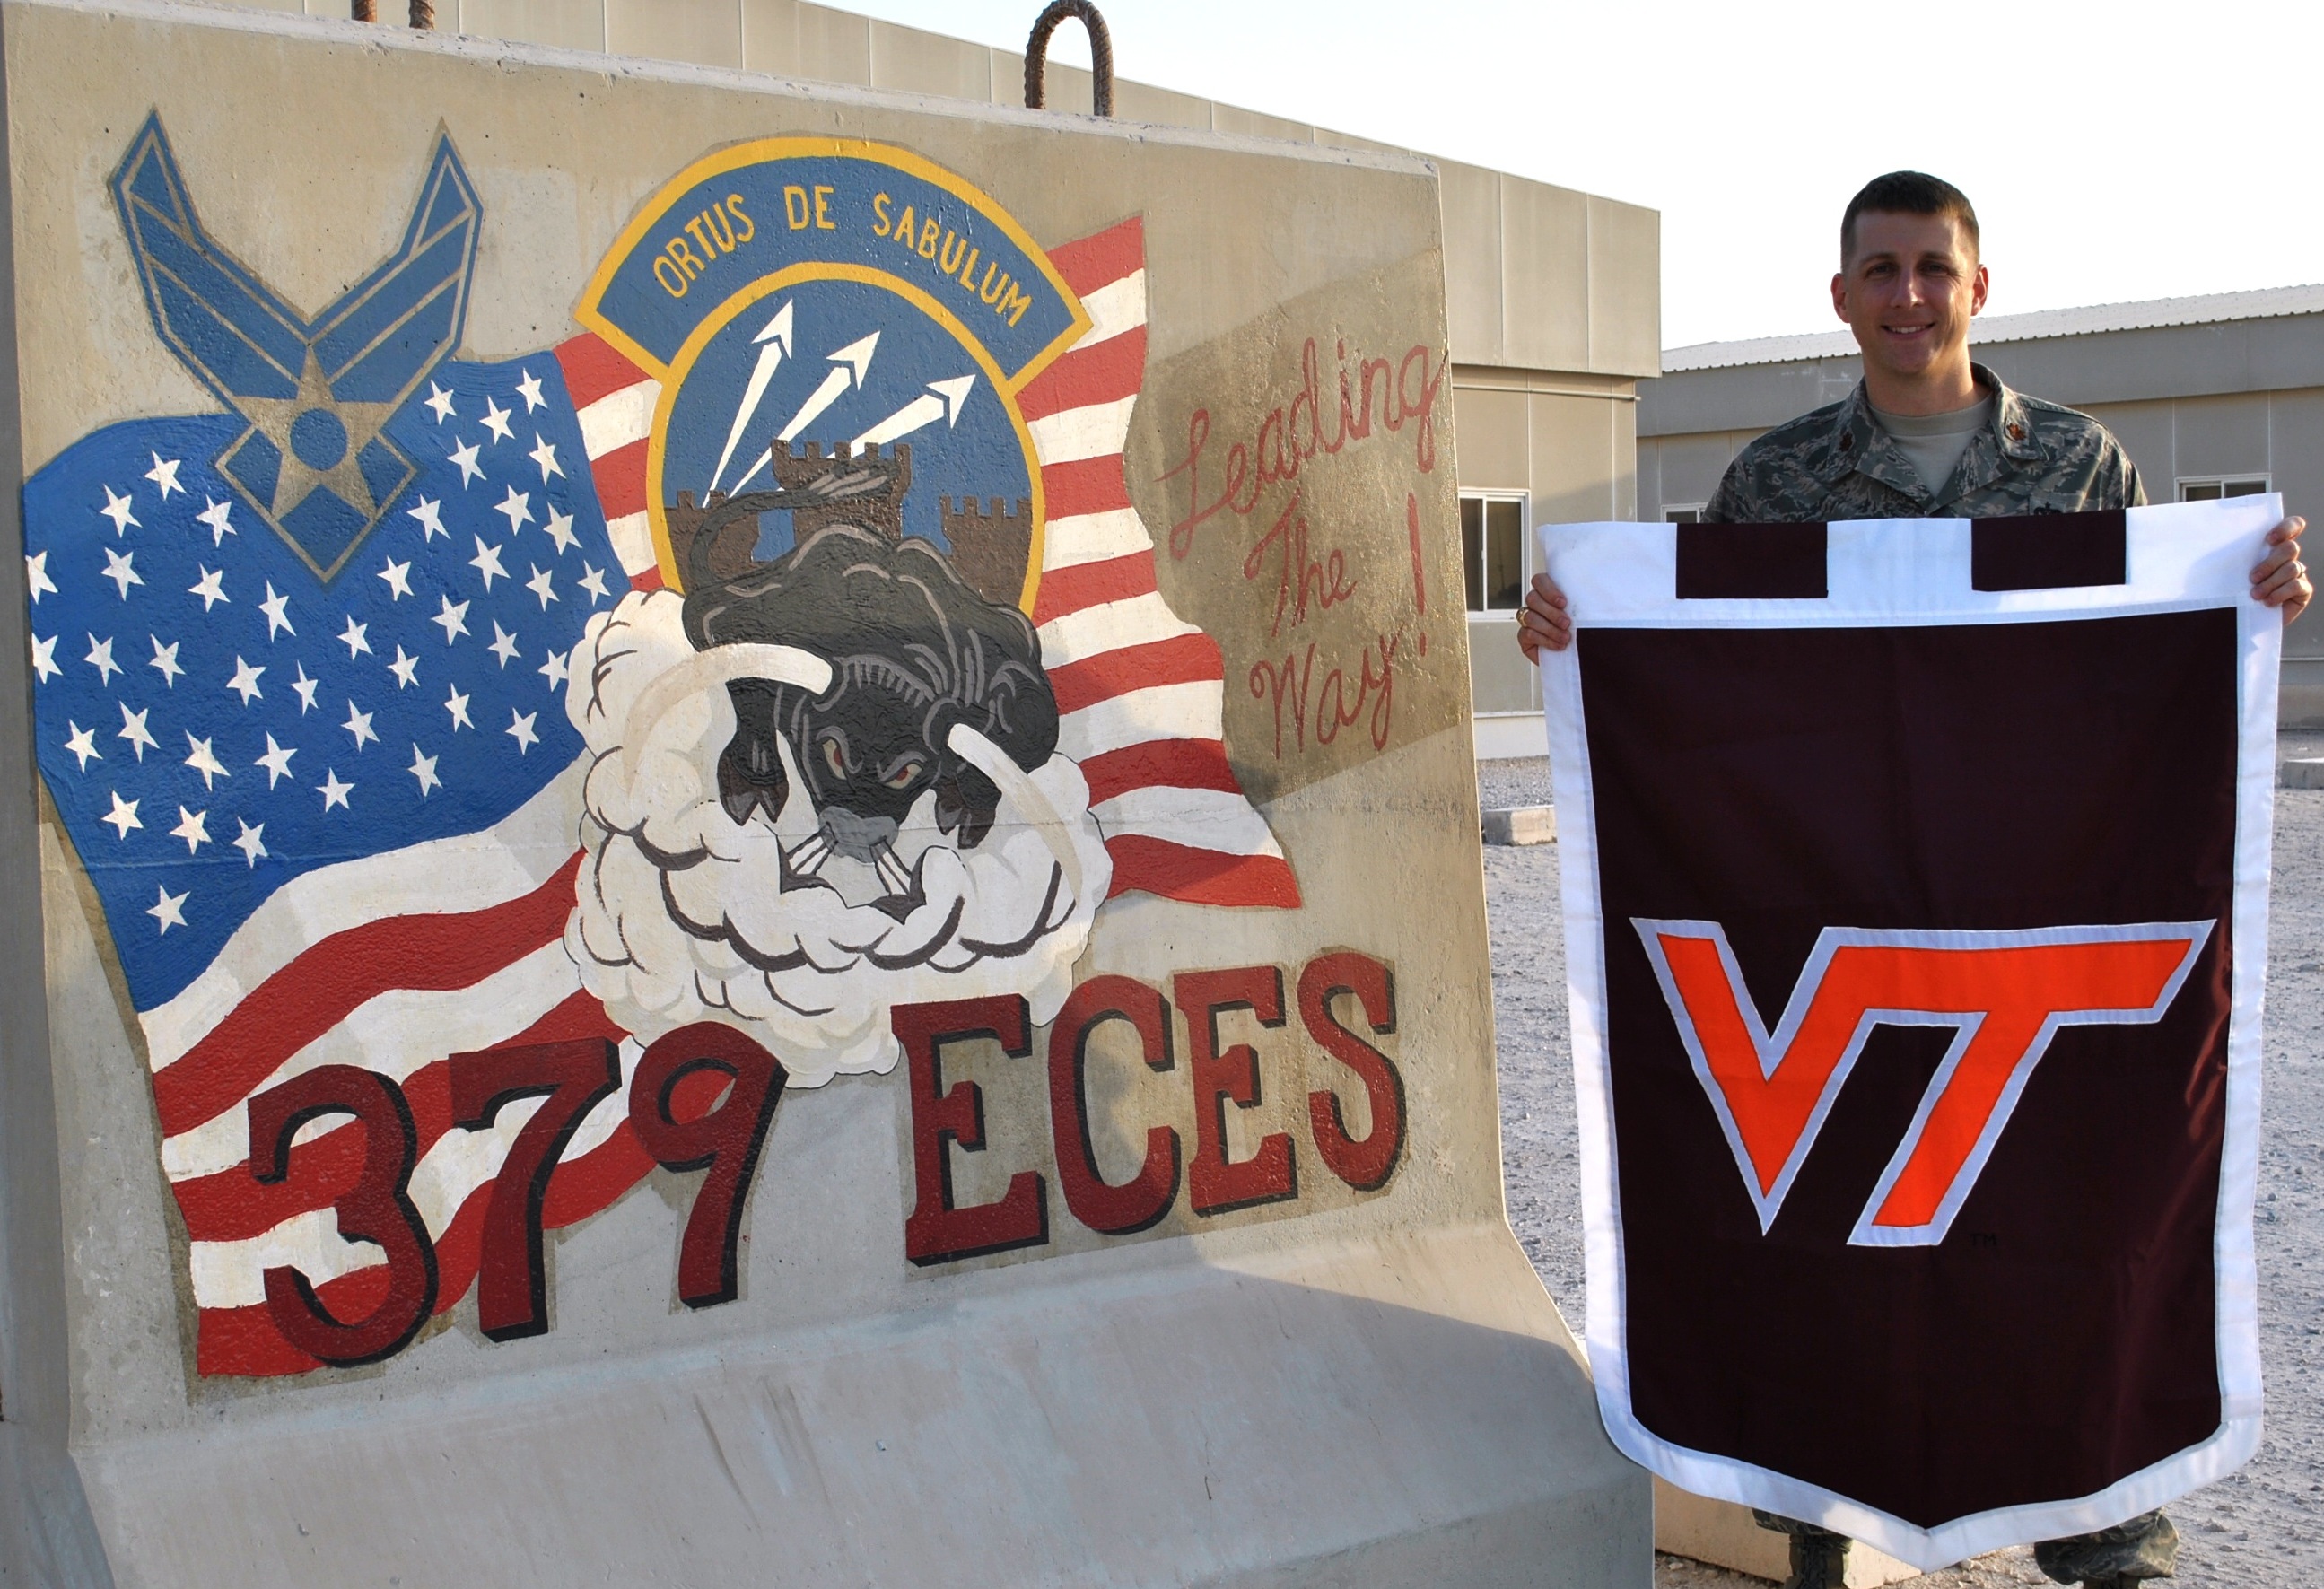 Maj. Ryan Crowley, U.S. Air Force, Virginia Tech Corps of Cadets Class of 2001 next to his unit sign.